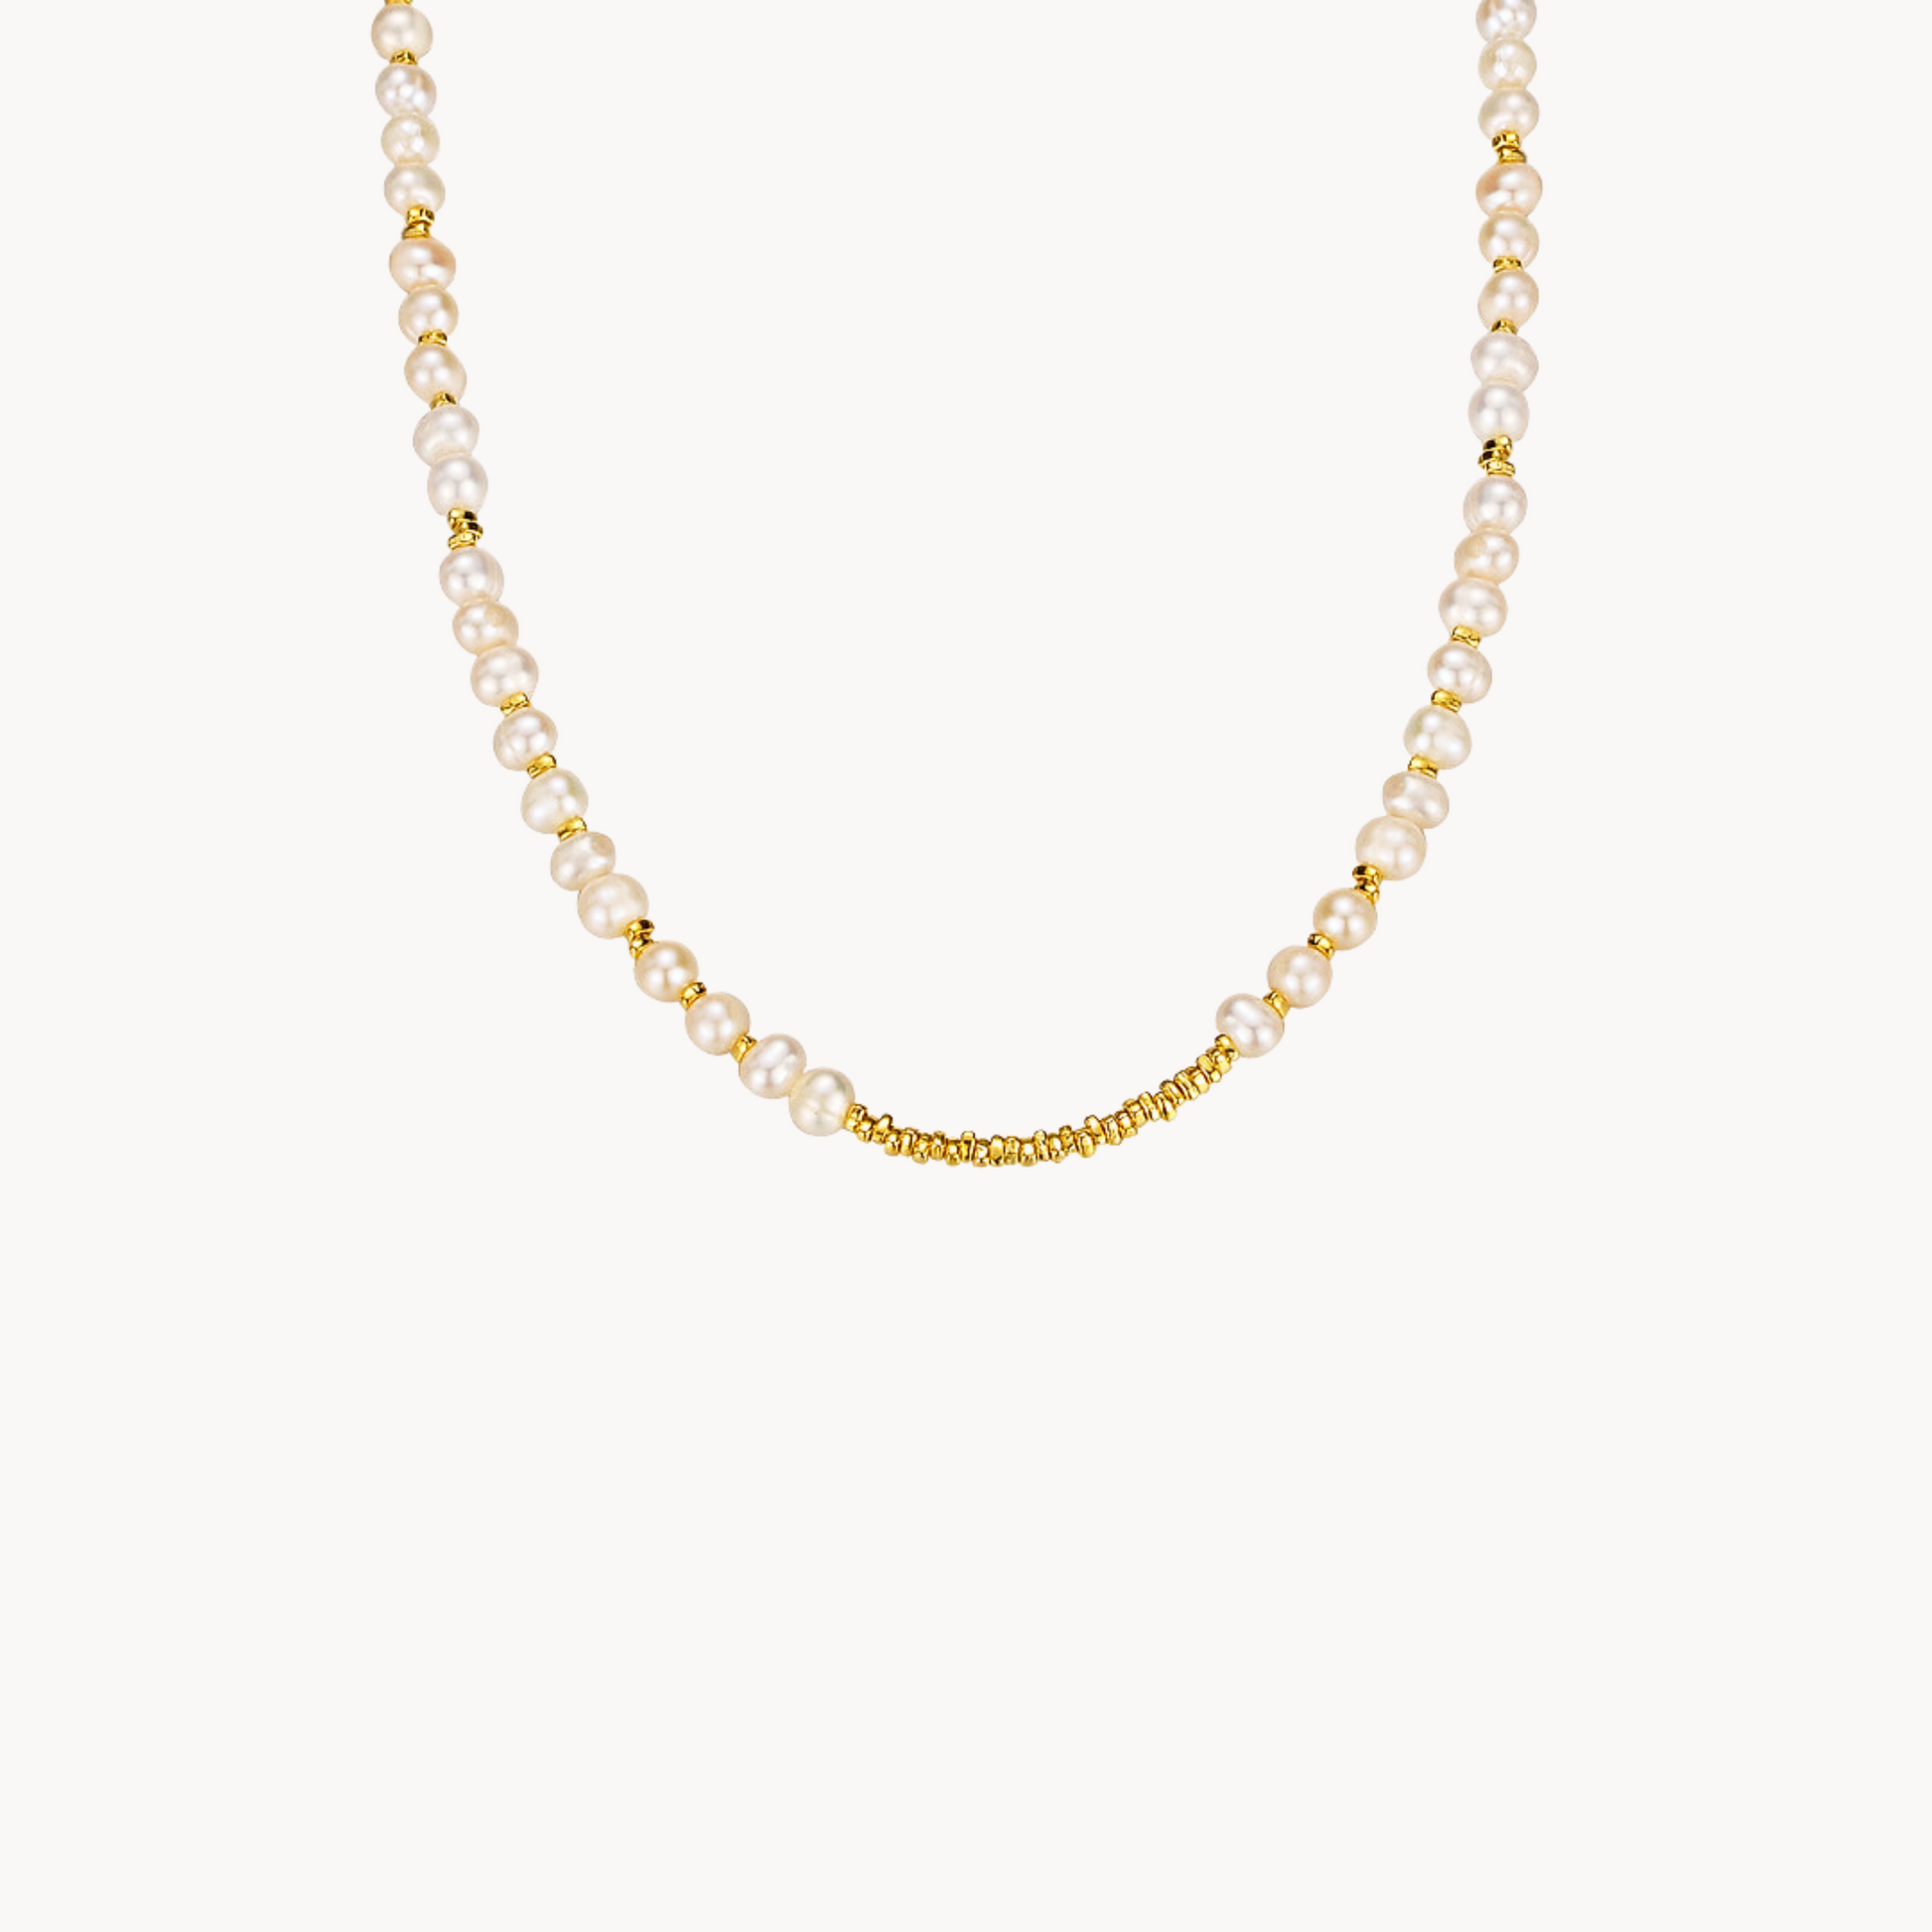 Pearl Bead Necklace with Sterling Silver or 18k Gold Chain